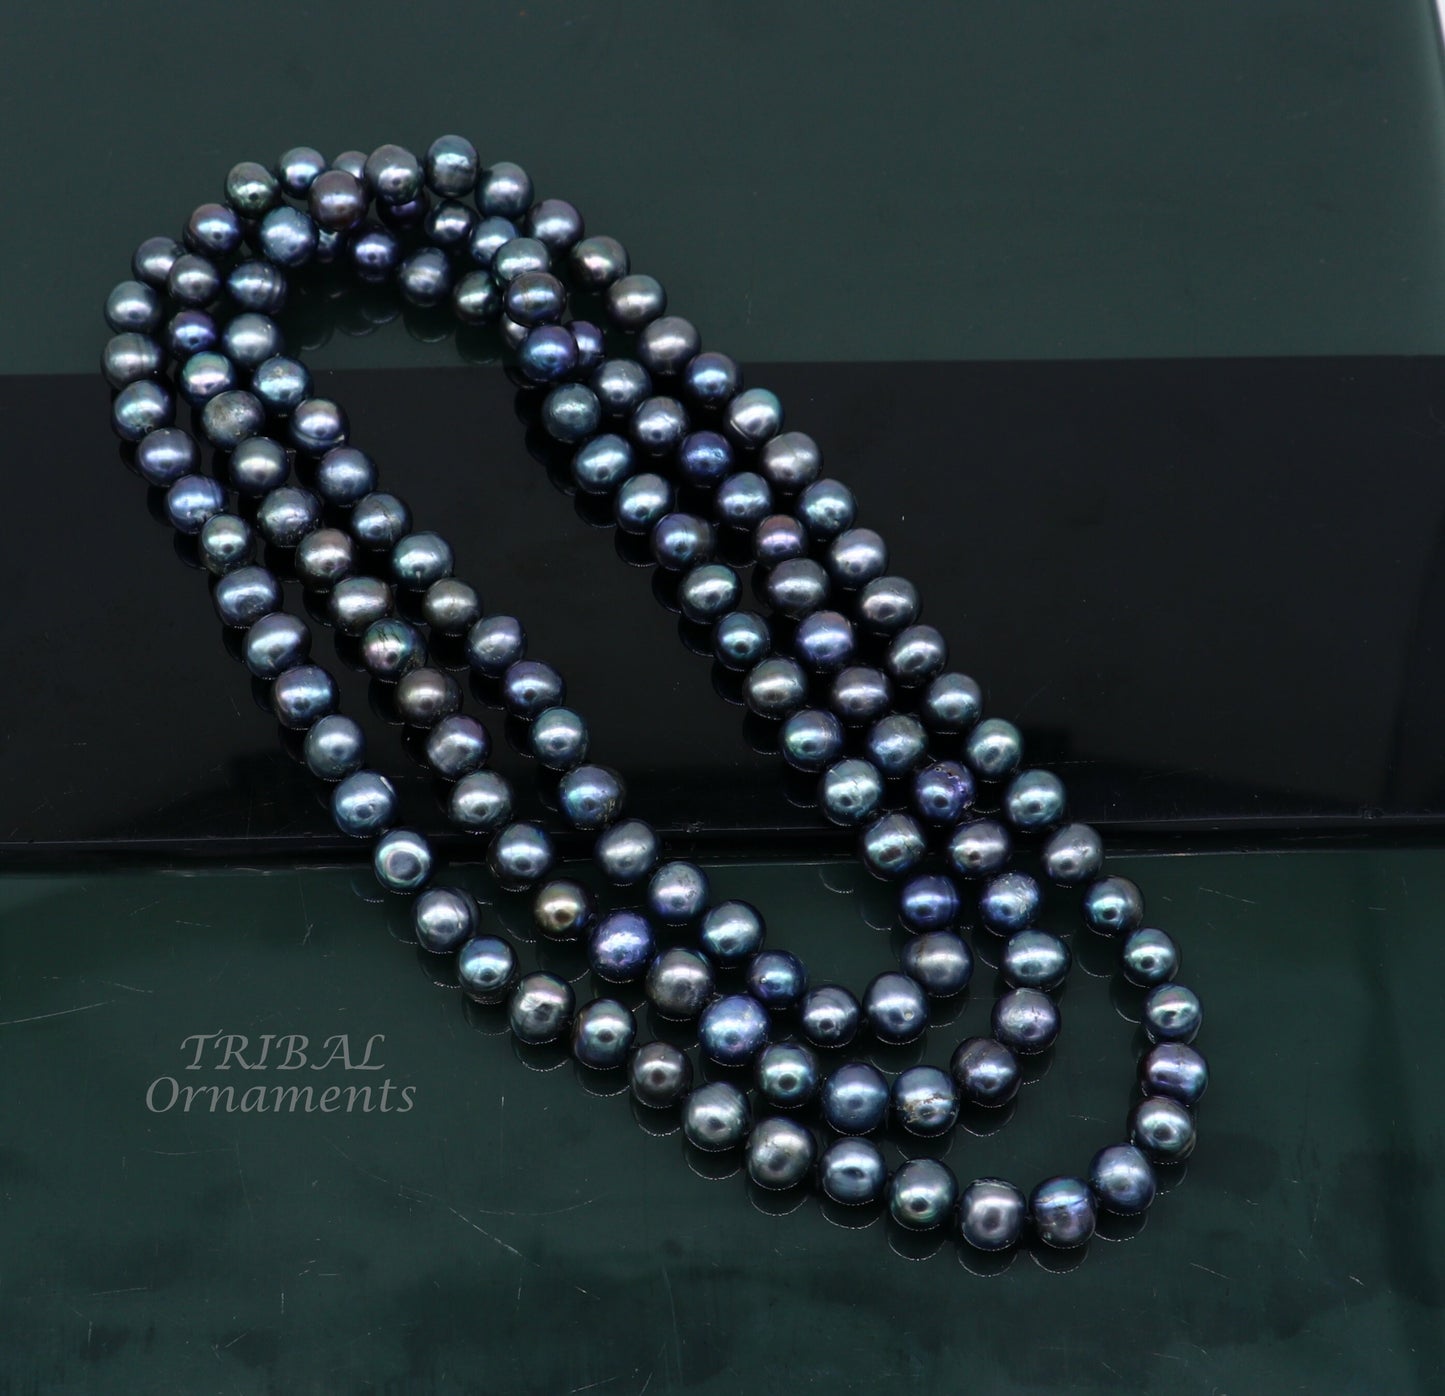 9mm 716 carats fresh water pearl dark gray bright shining beaded 48 inches  necklace chain, looking gorgeous brides groom jewelry pnec01 - TRIBAL ORNAMENTS